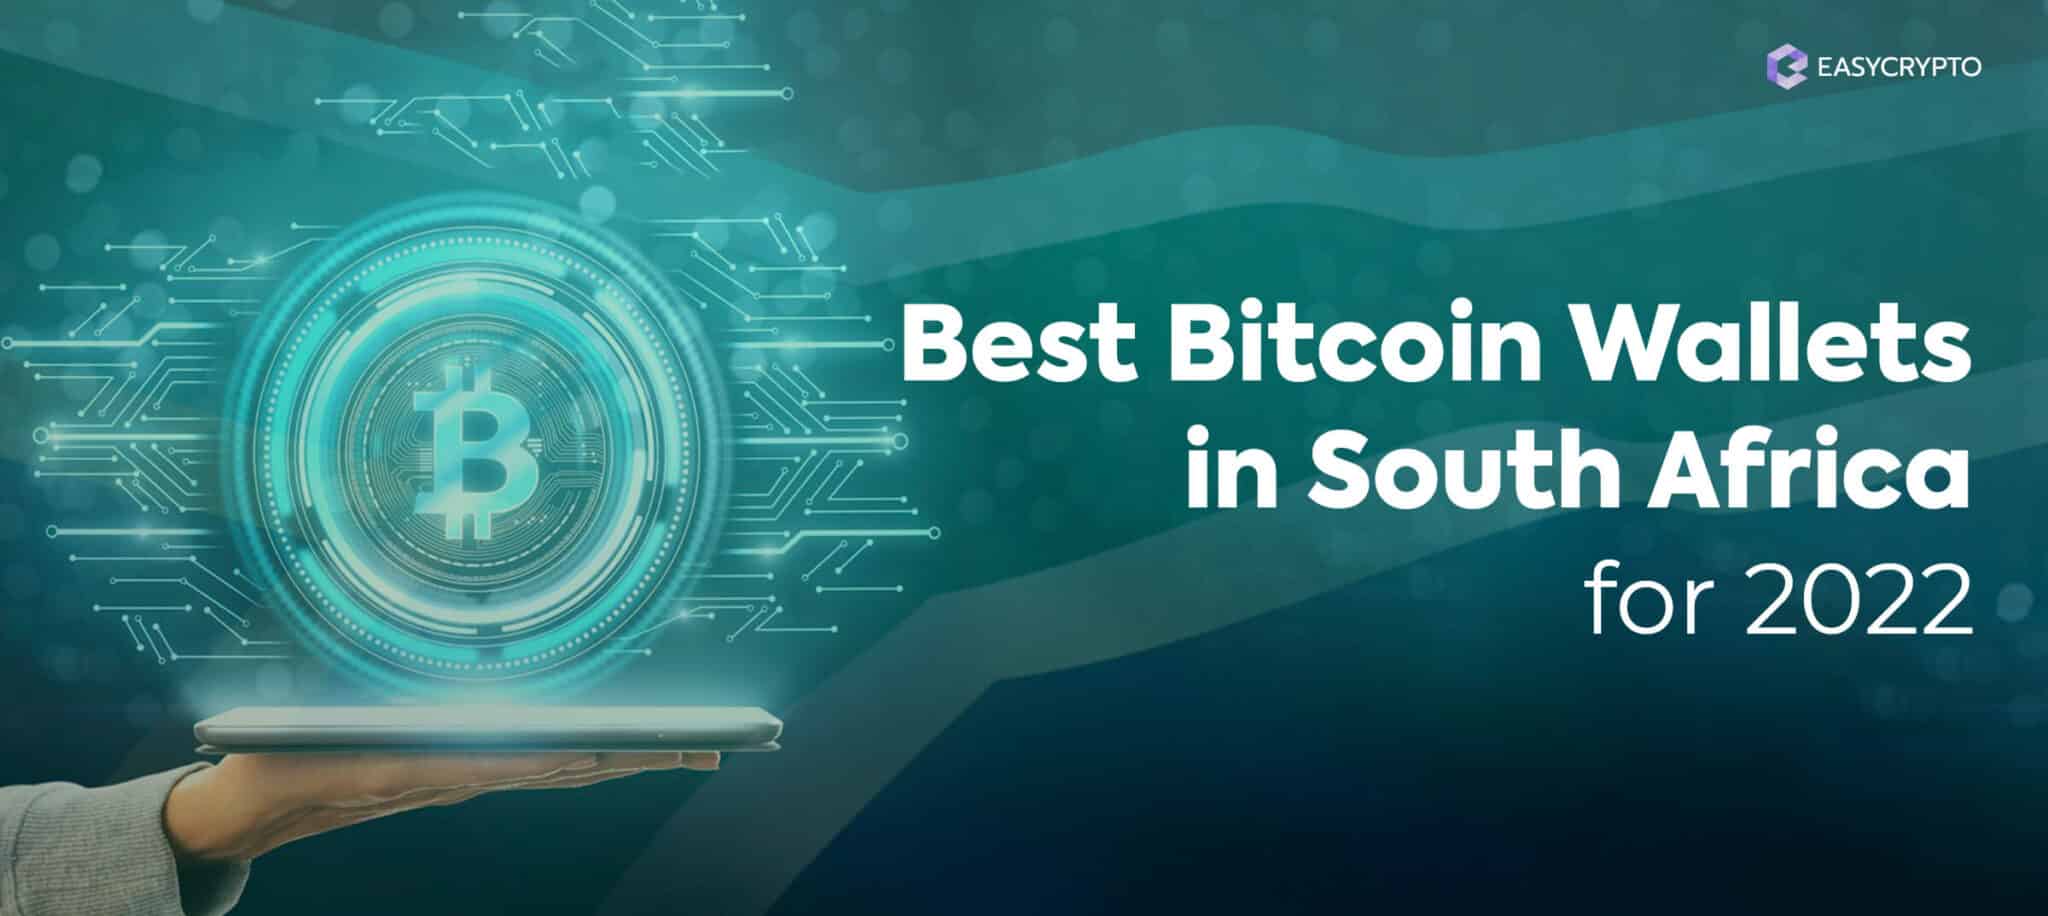 south africa bitcoin wallet